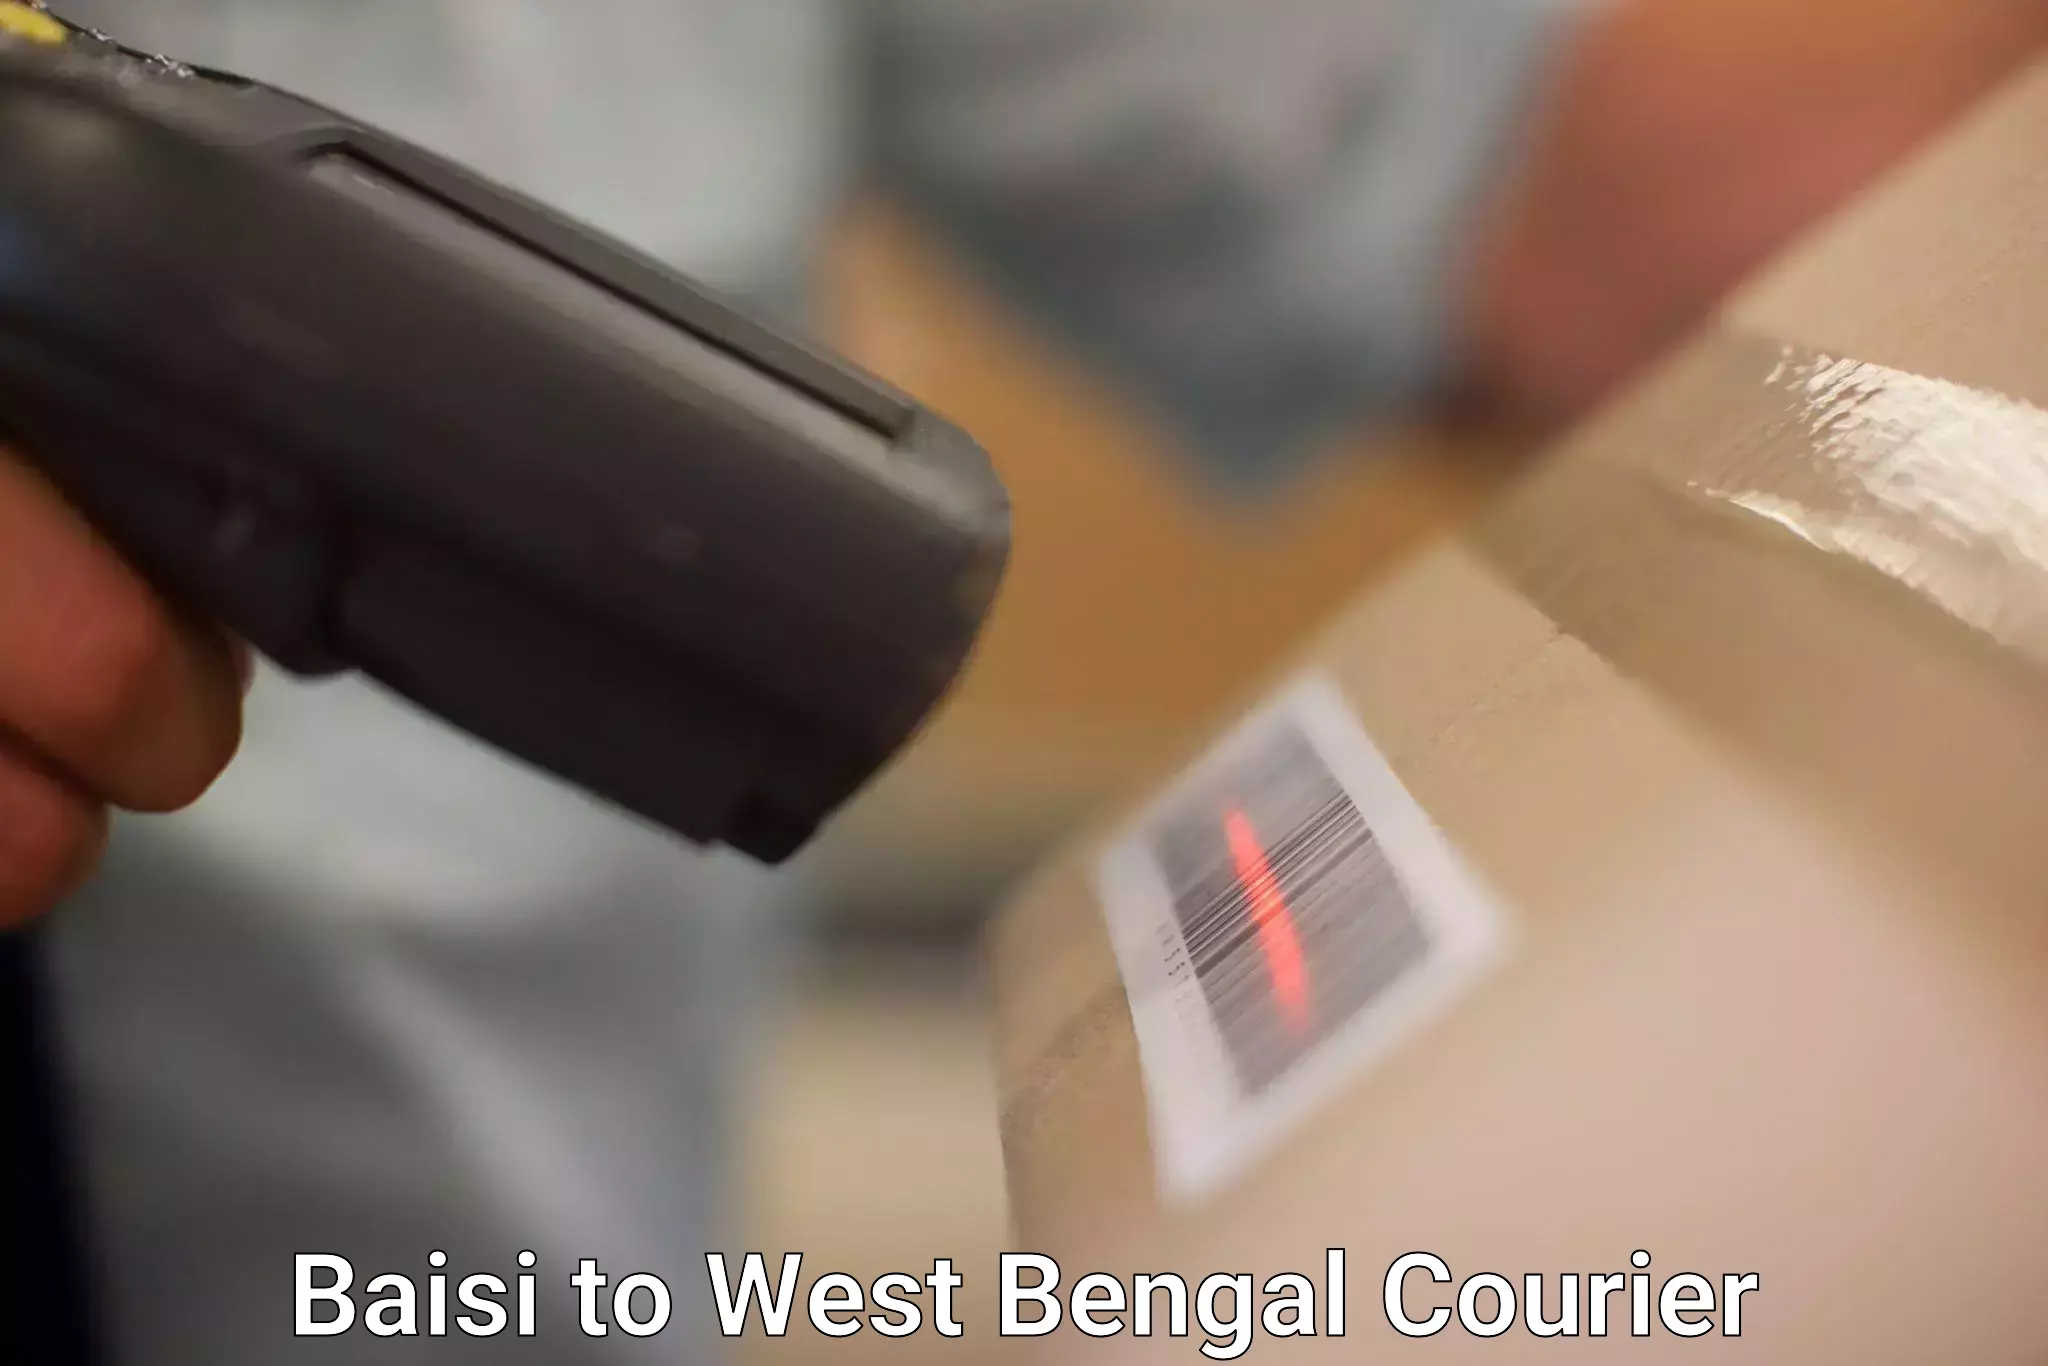 International courier networks Baisi to West Bengal